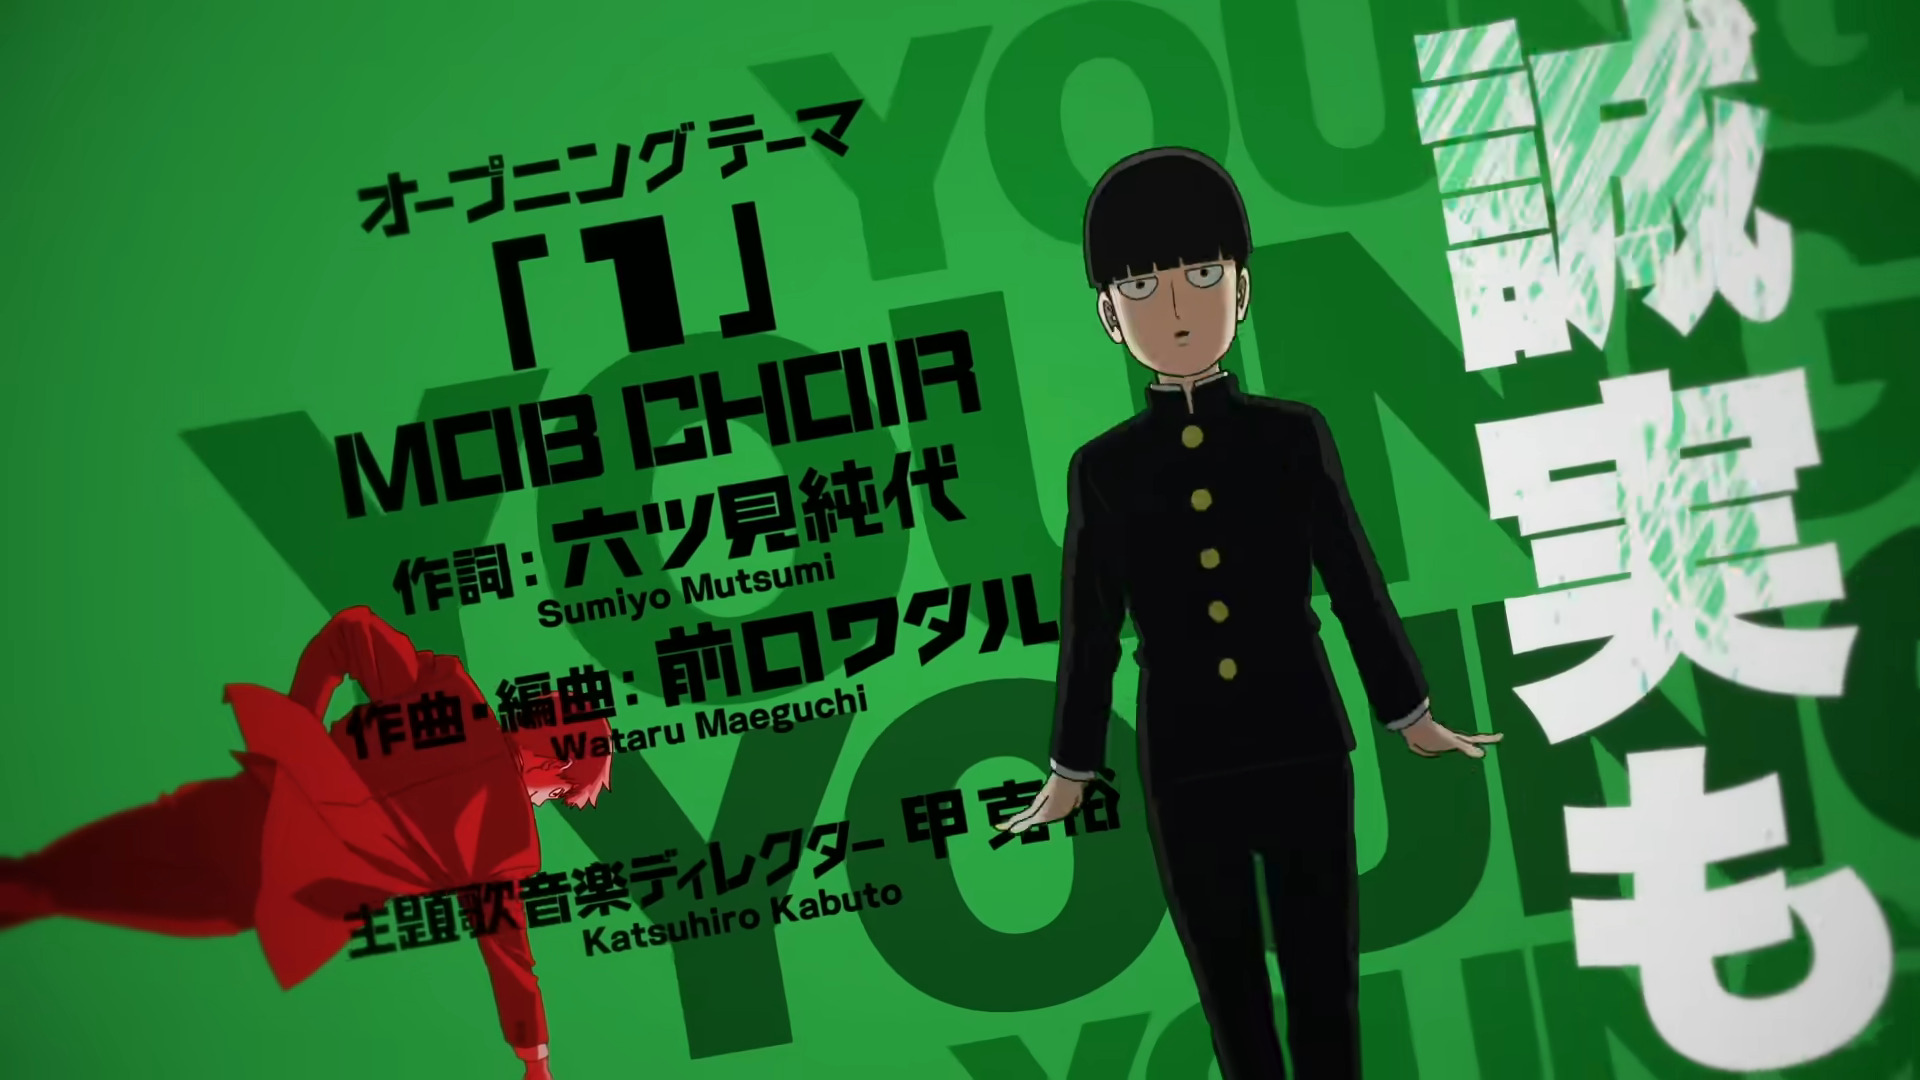 Crunchyroll may be replacing Mob's voice actor in Mob Psycho 100 III due to  issues with SAG-AFTRA